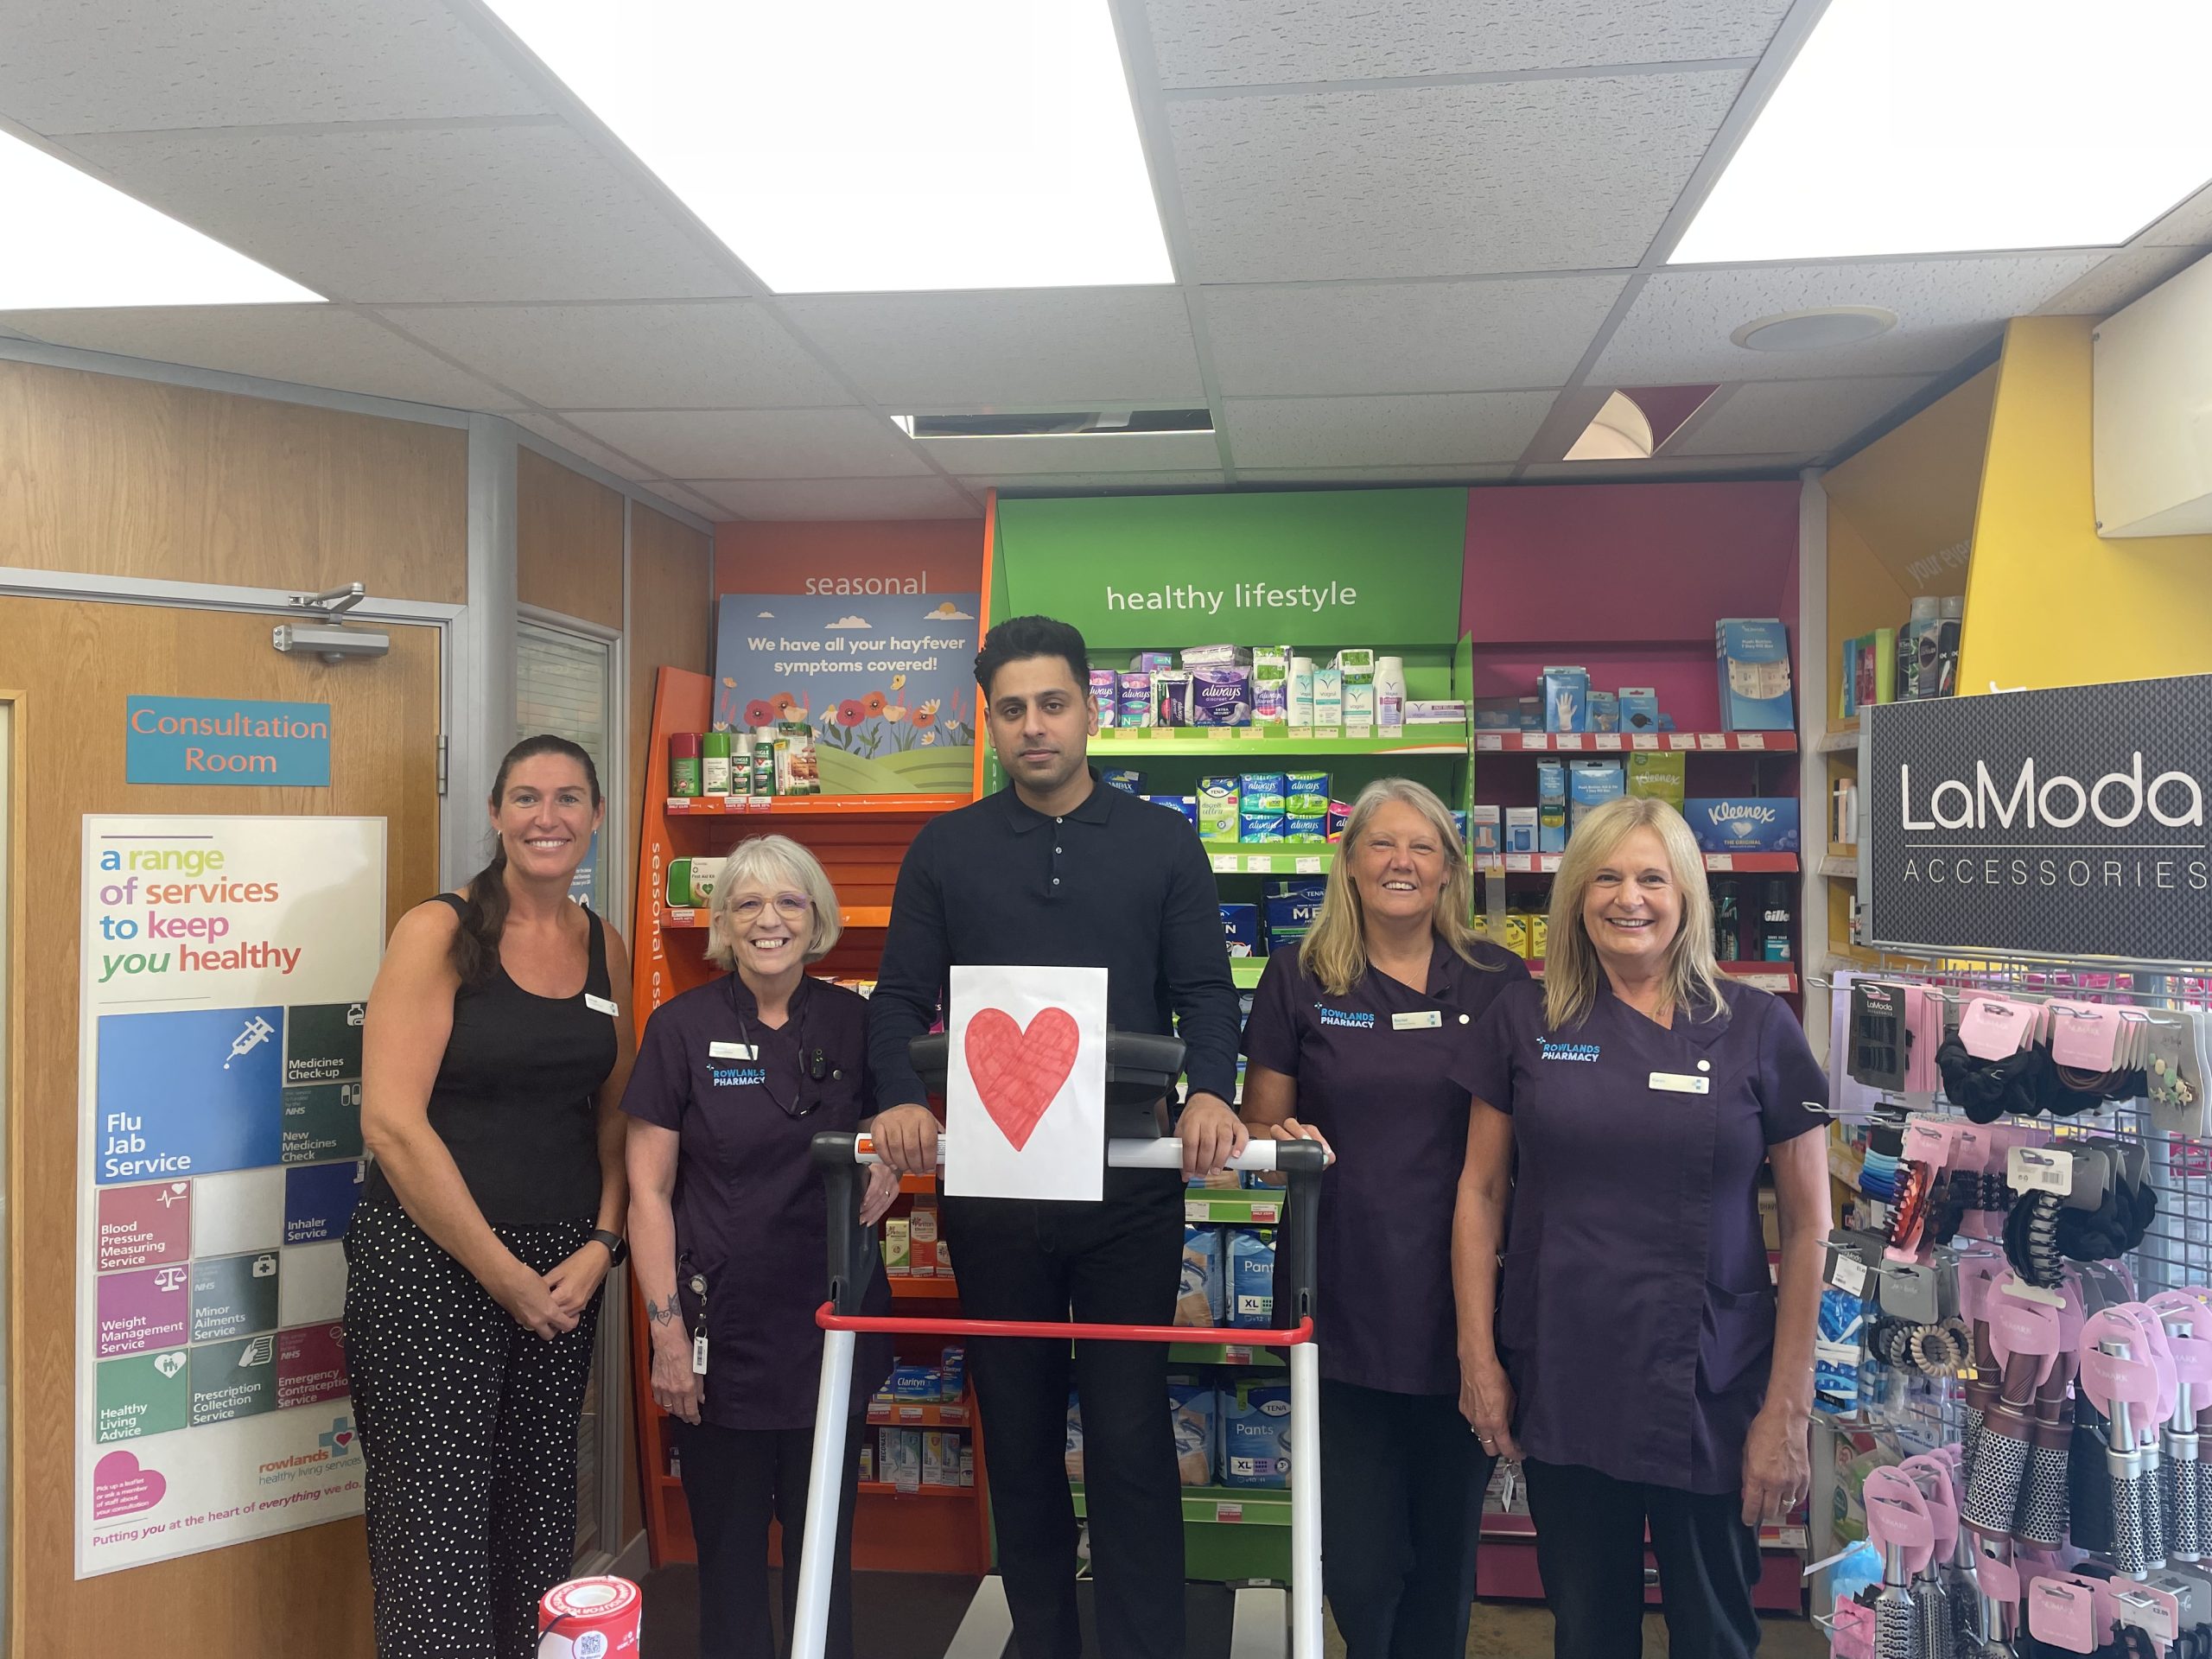 COMMUNITY | Staff at Rowlands Pharmacy in Hereford are walking / running 218 miles from Hereford to Cornwall, to raise money for charity